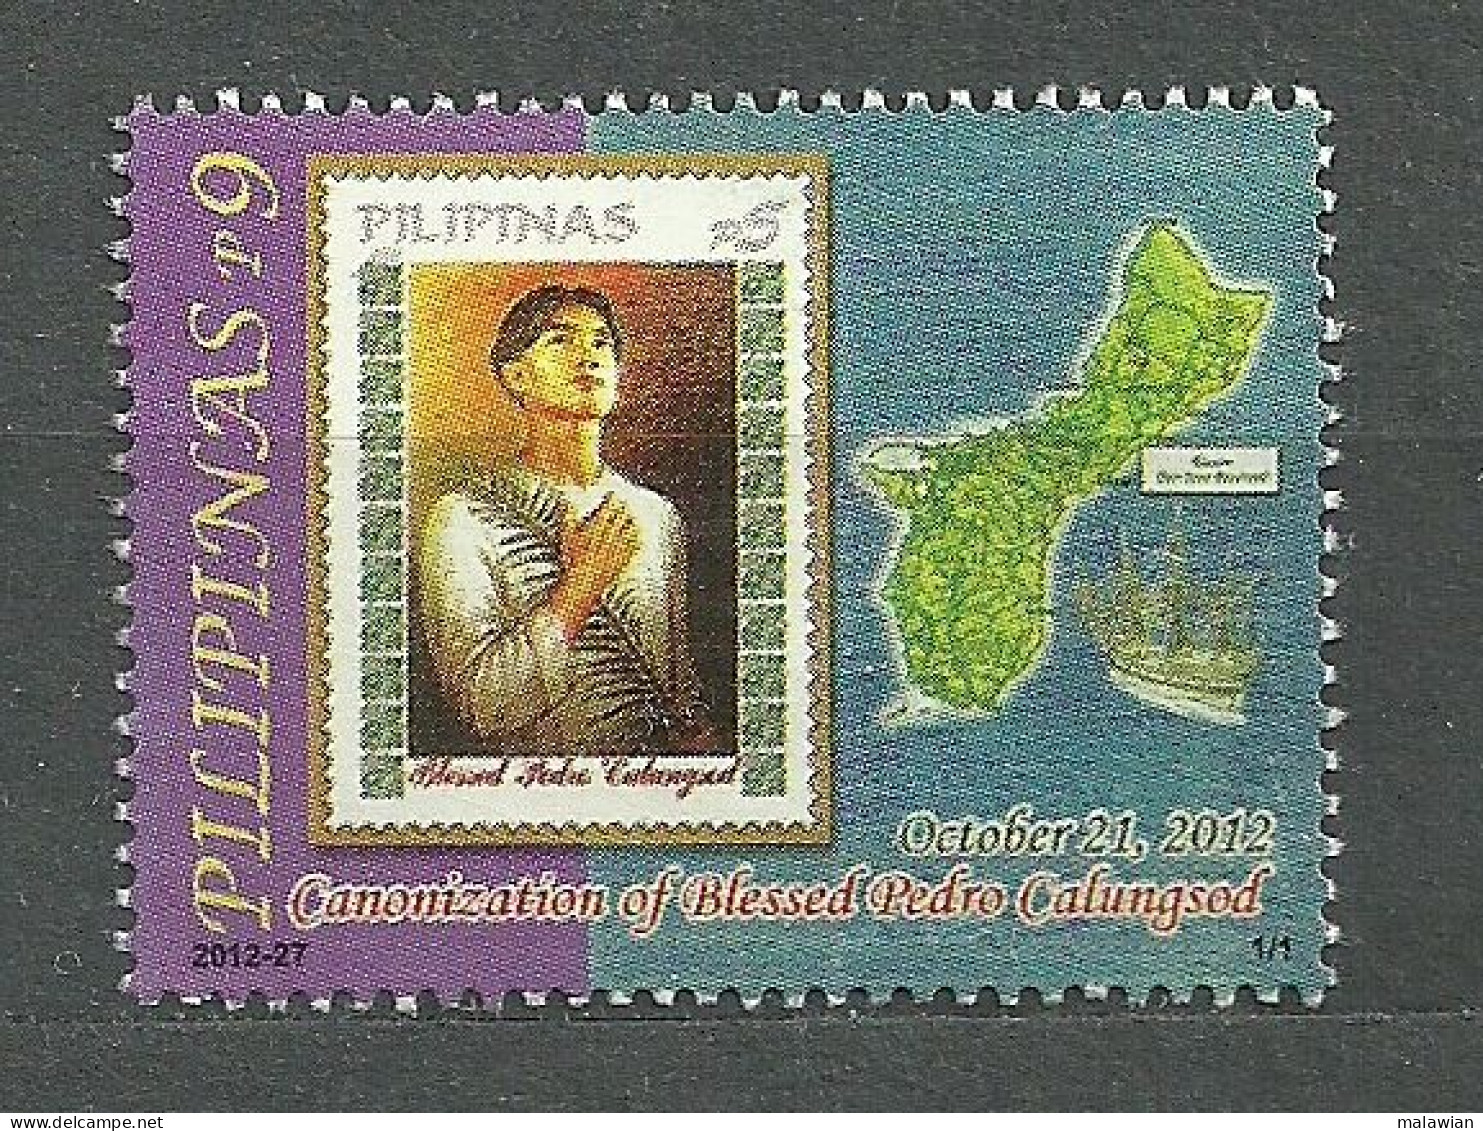 Philippines, 2012 (#4795a), Canonization Of Pedro Calungsod, Young Martyr, Beatified By Pope John Paul II, Map, Ship -1v - Cristianismo